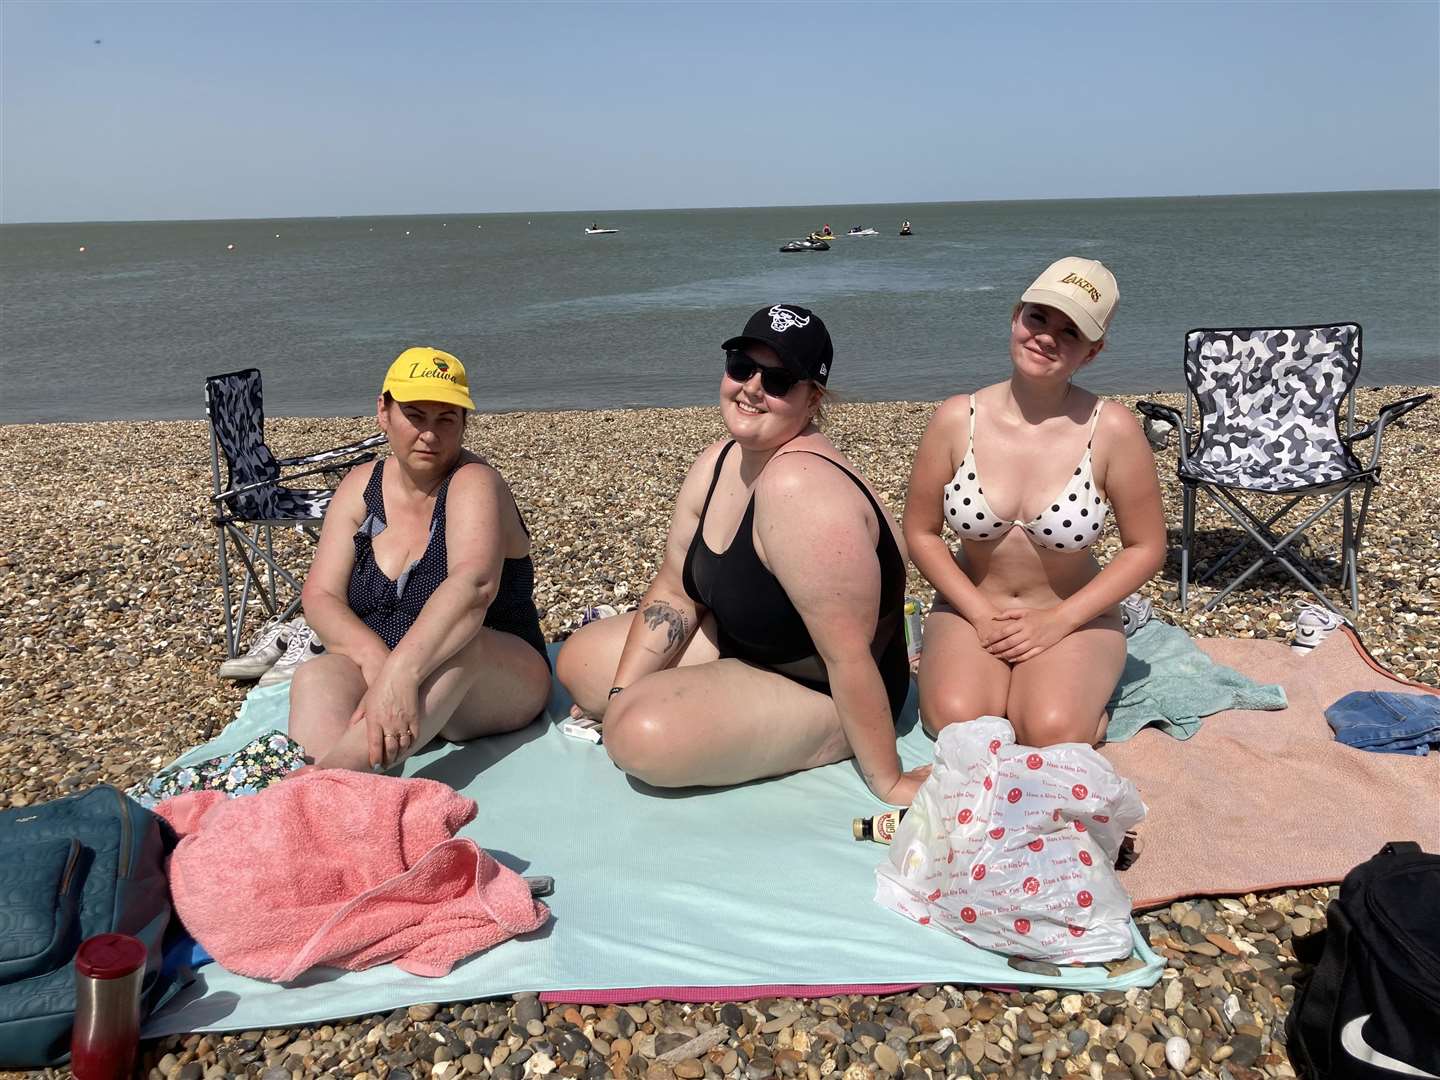 Kent last saw temperatures reach 30C on the hottest day of the year in June, Vilma Bakeviciene, Karoline Bakeviciute and Lurdita Saiaukaite enjoyed the sun at the Isle of Sheppey. Photo: John Nurden